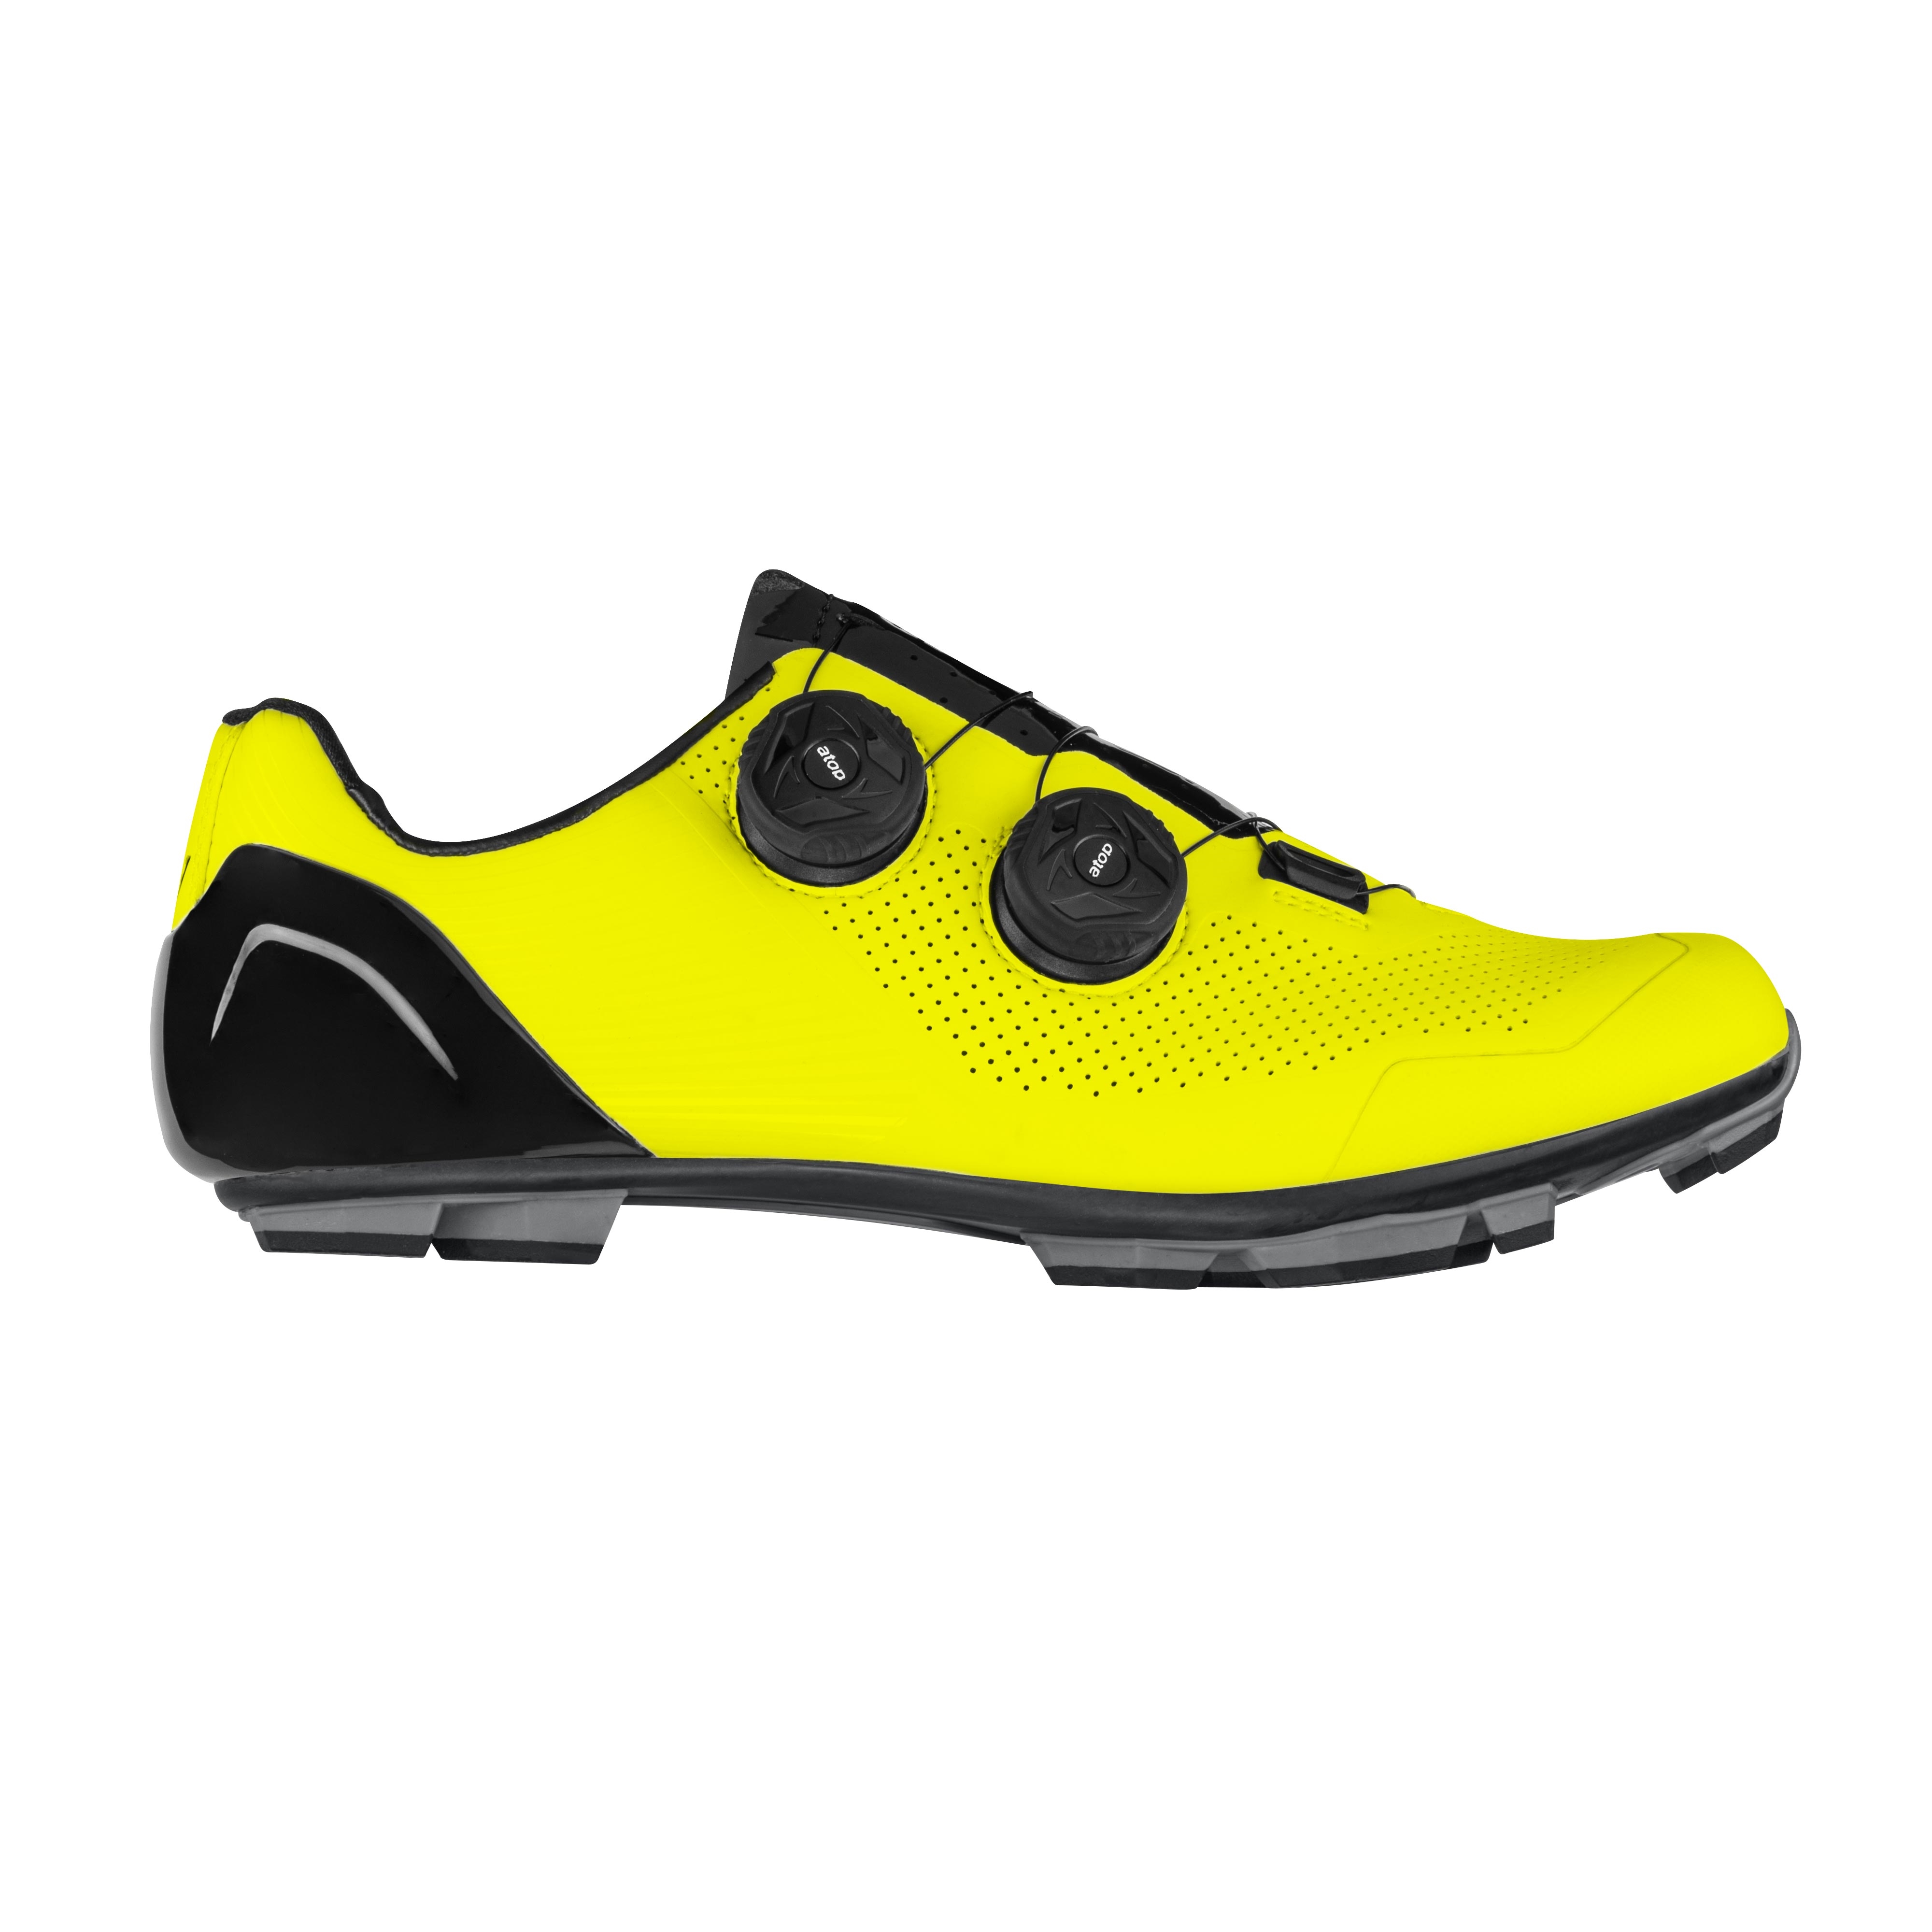 tretry FORCE MTB WARRIOR CARBON, fluo 41